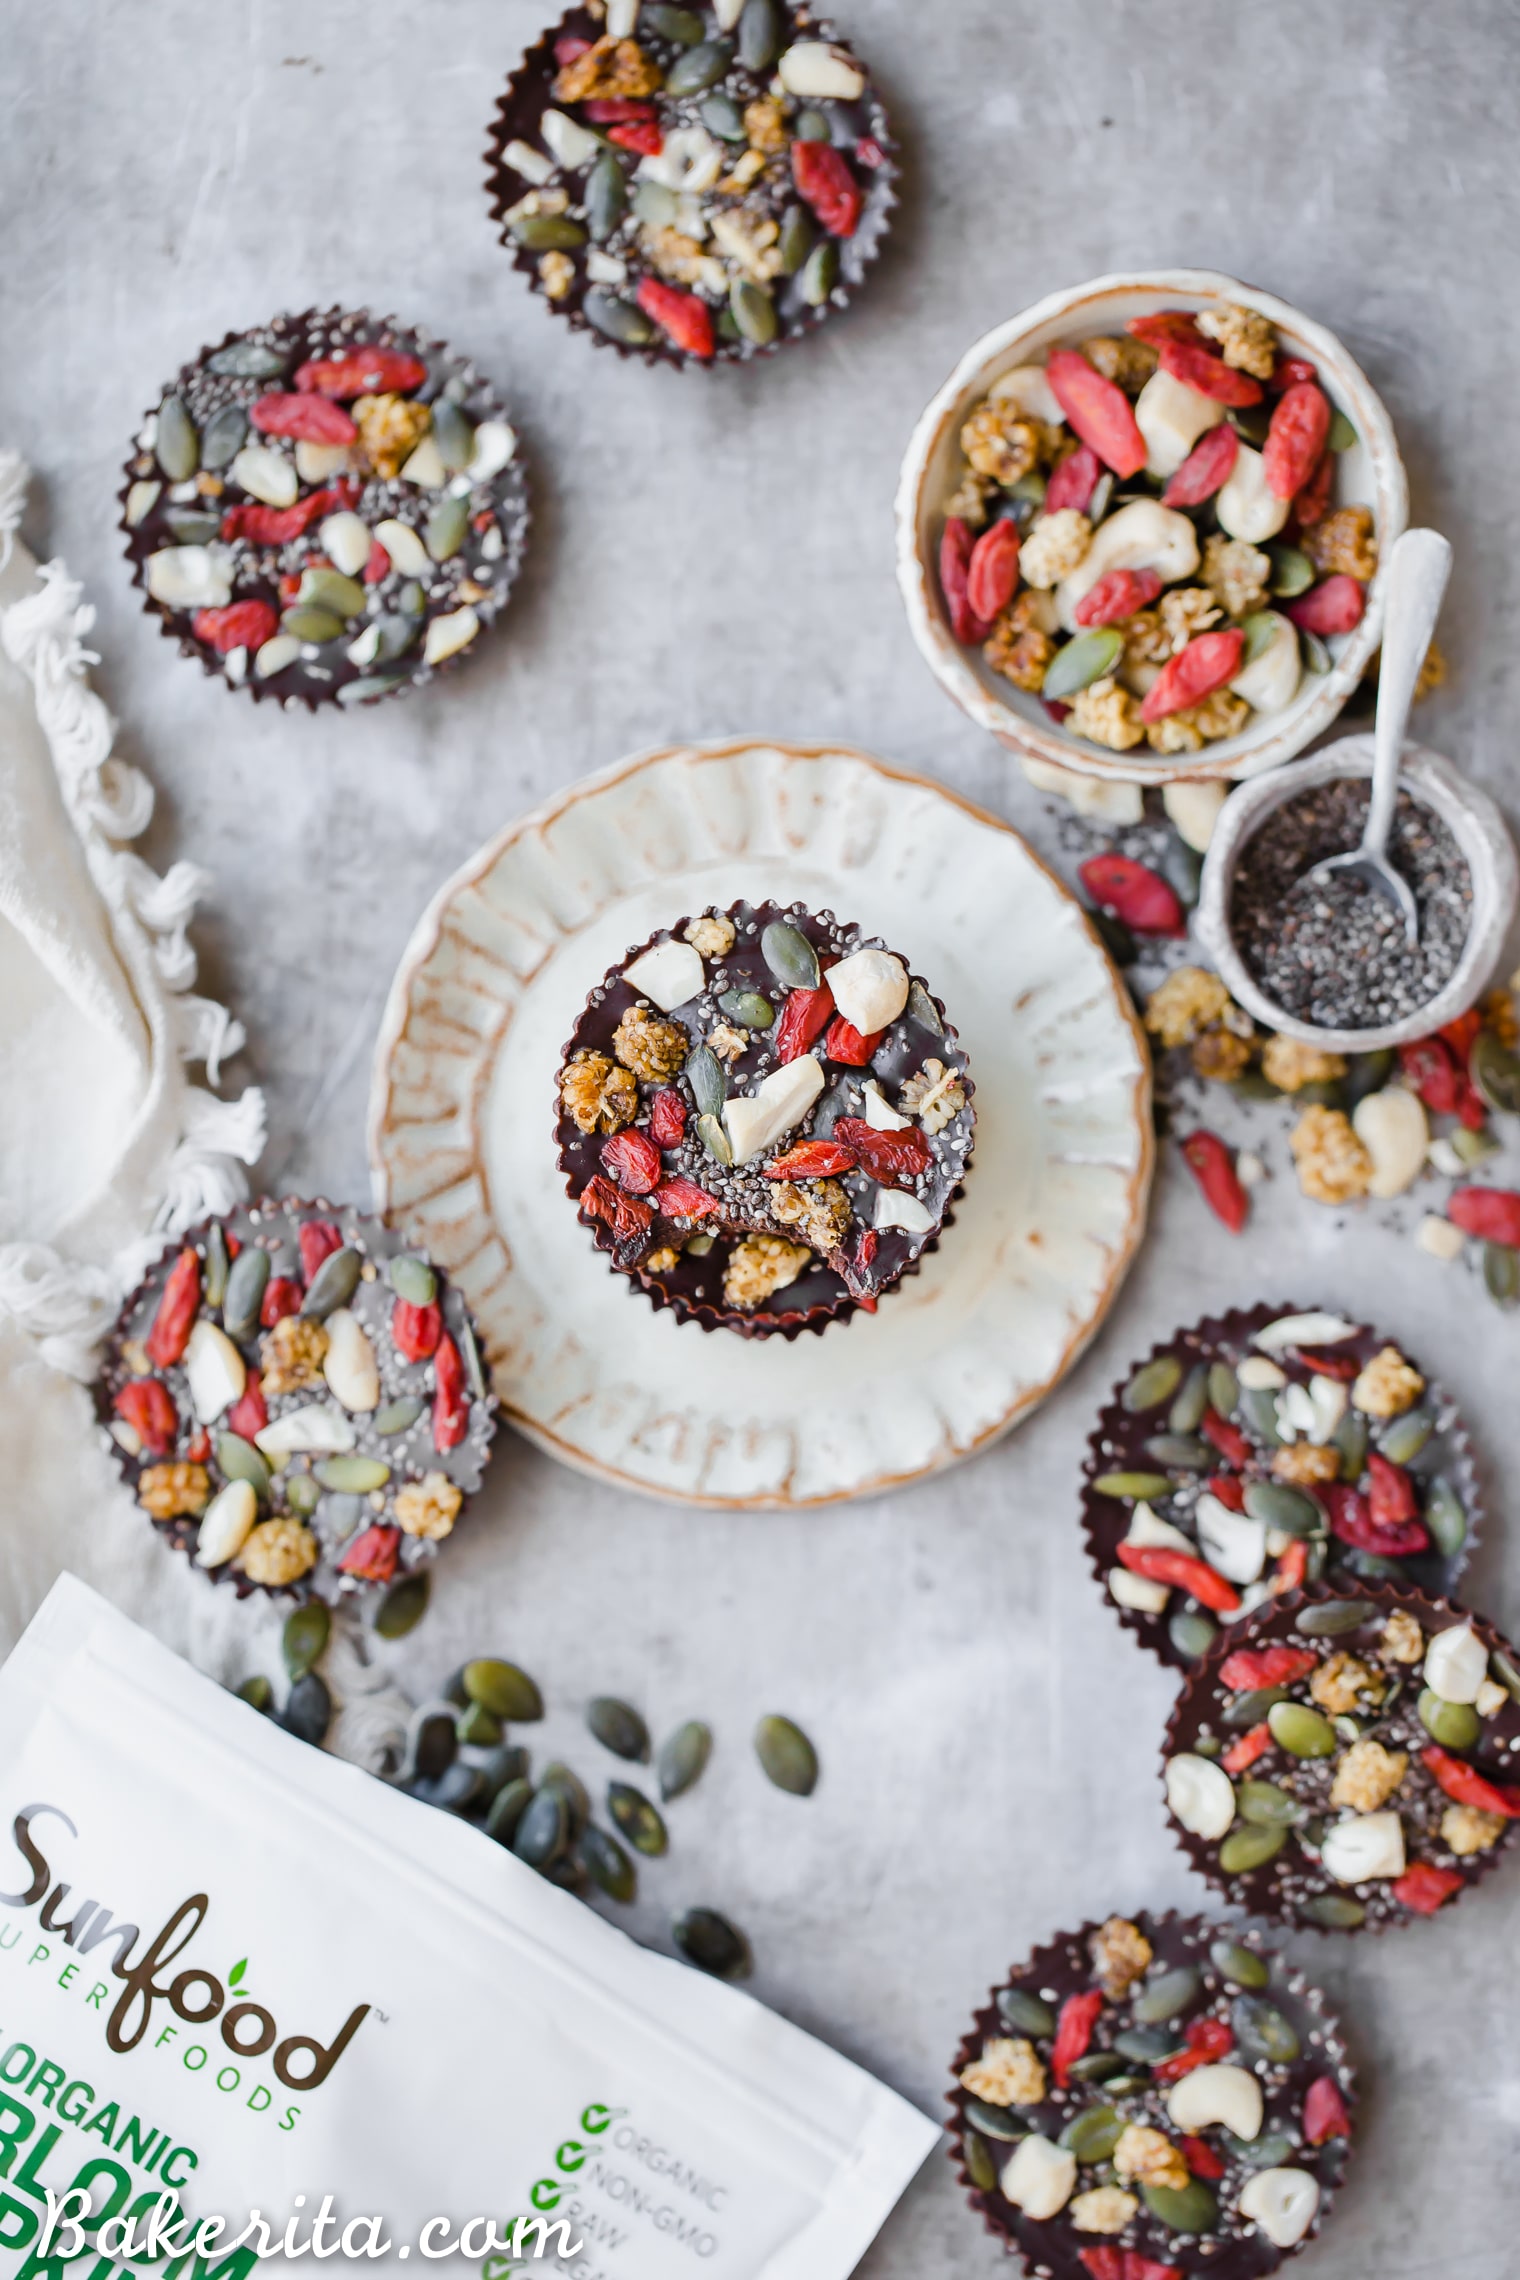 These Superfood Cacao Fudge Bites are creamy, so rich in cacao flavor, and topped with all sorts of delicious superfoods, like cashews, goji berries, chia seeds, and more. They'll satisfy your candy craving and they're gluten-free, paleo, and vegan!